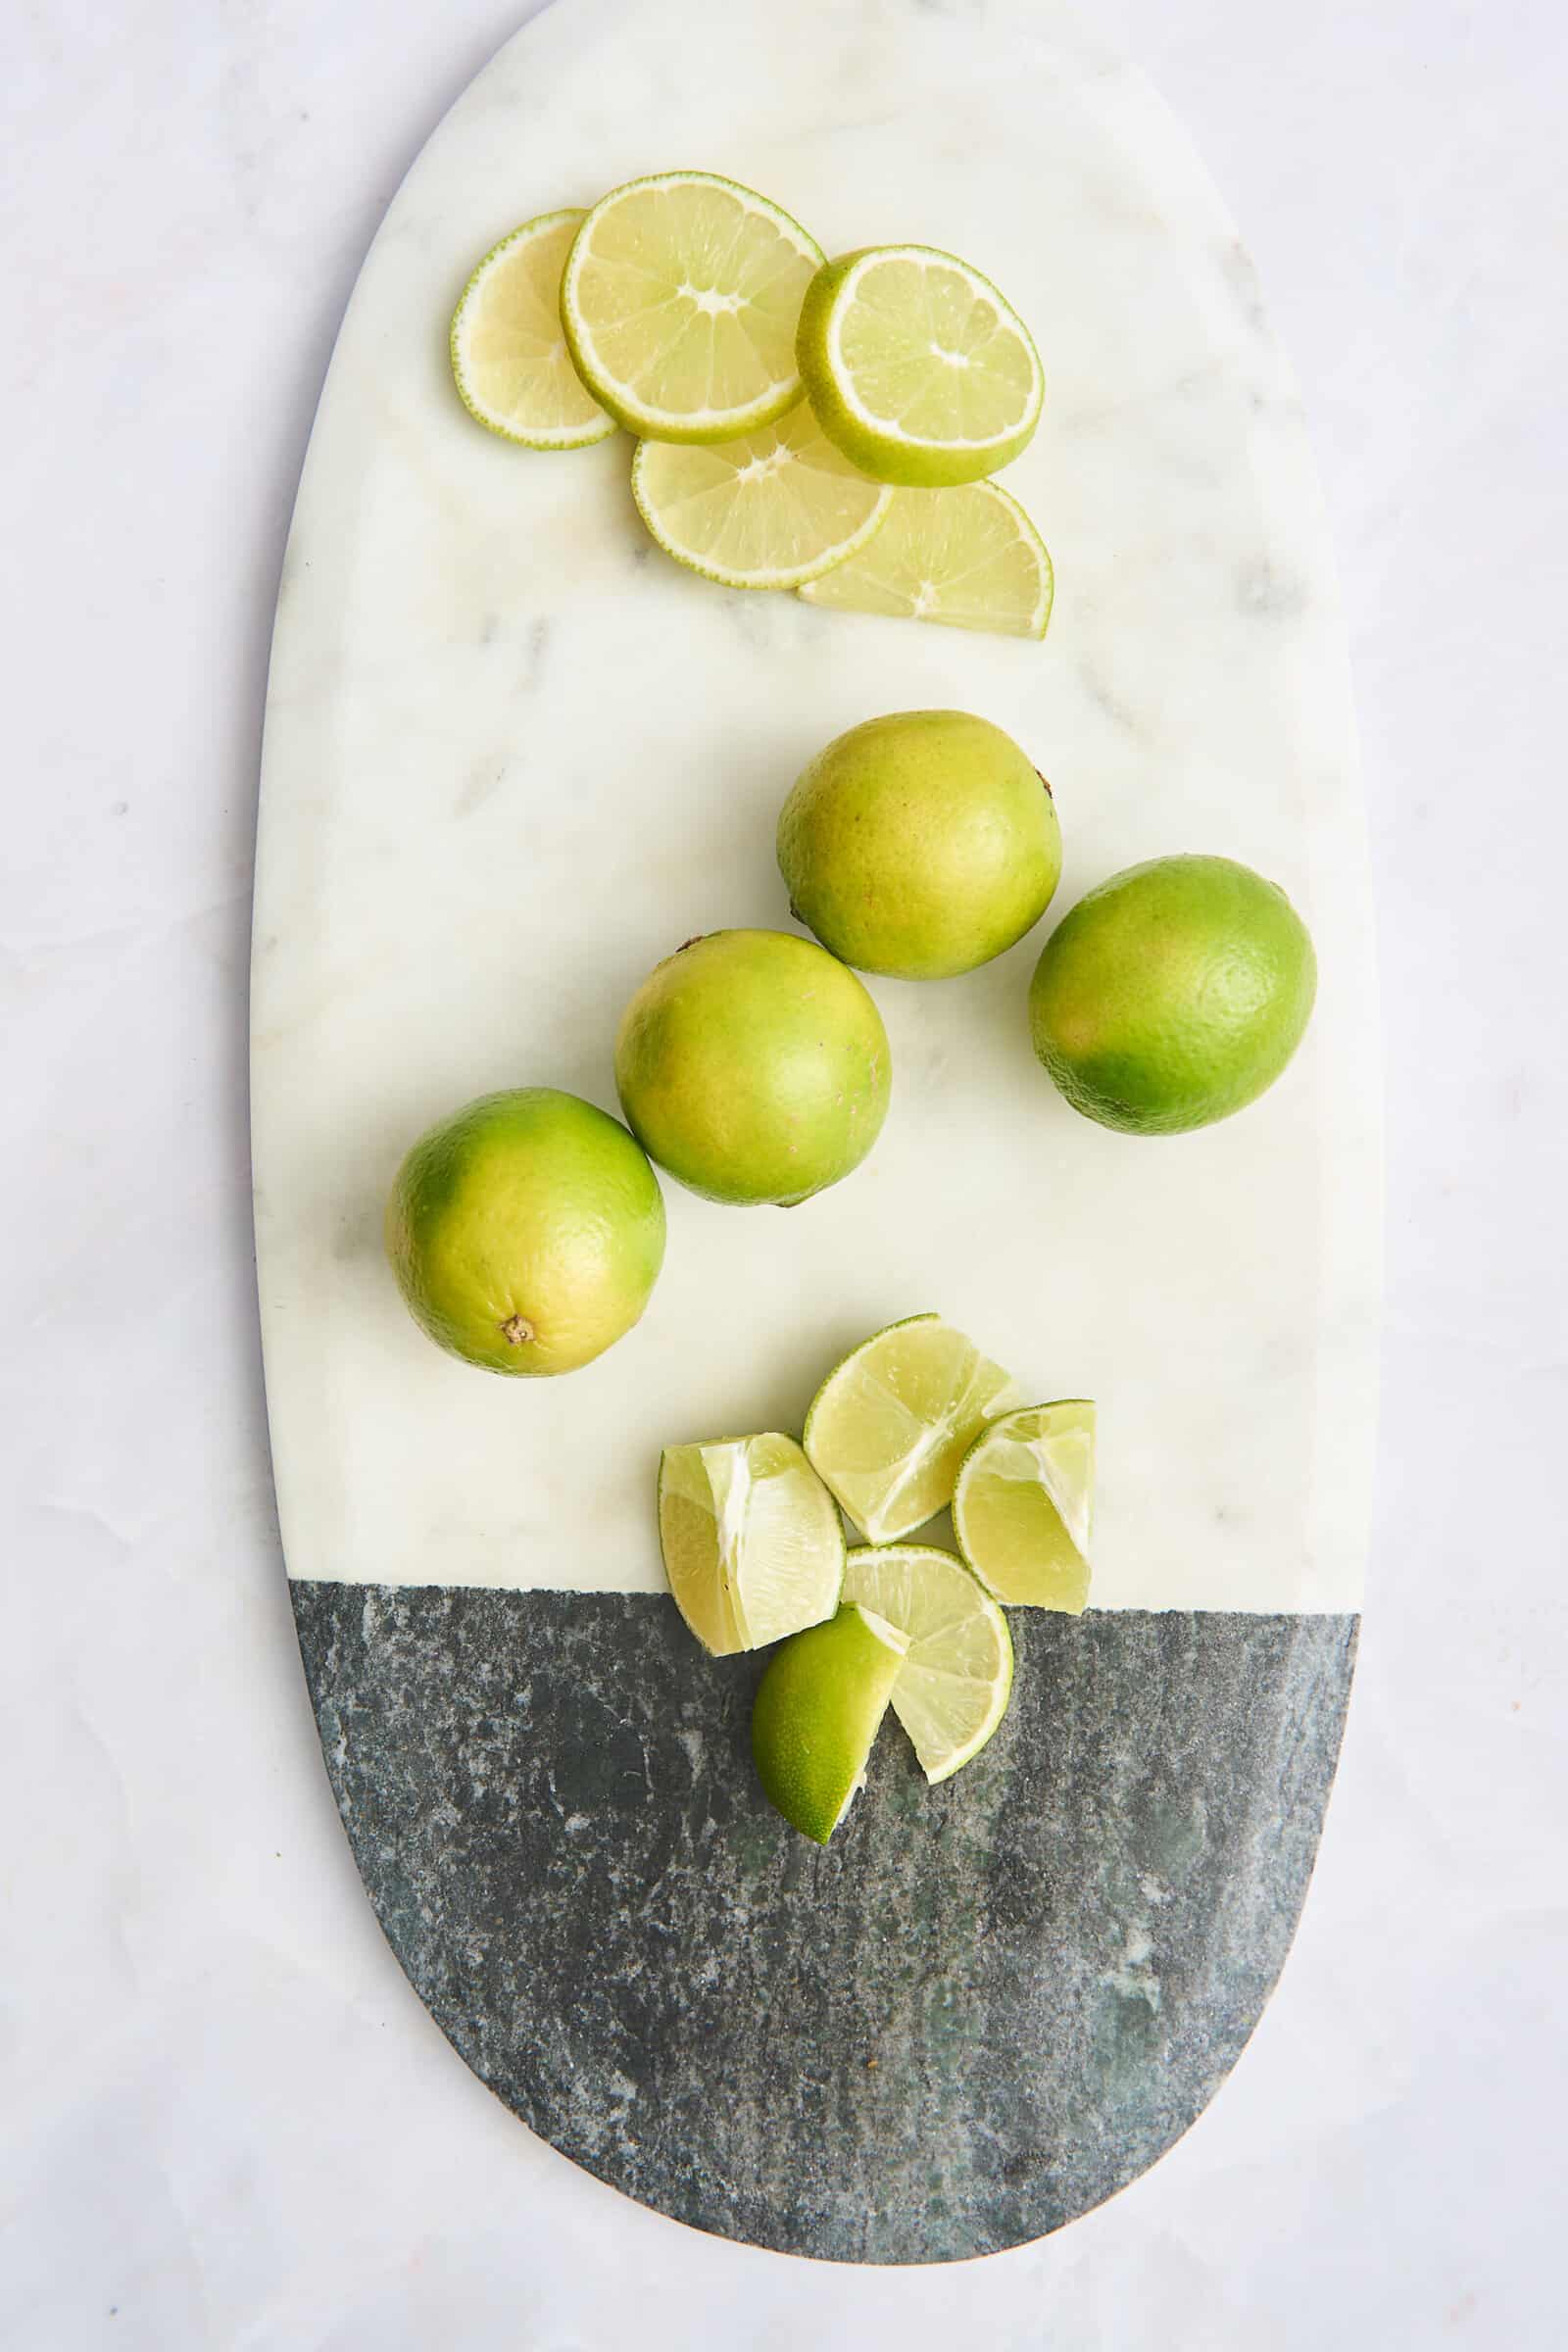 Lime rounds, whole limes, and lime wedges on a cutting board.